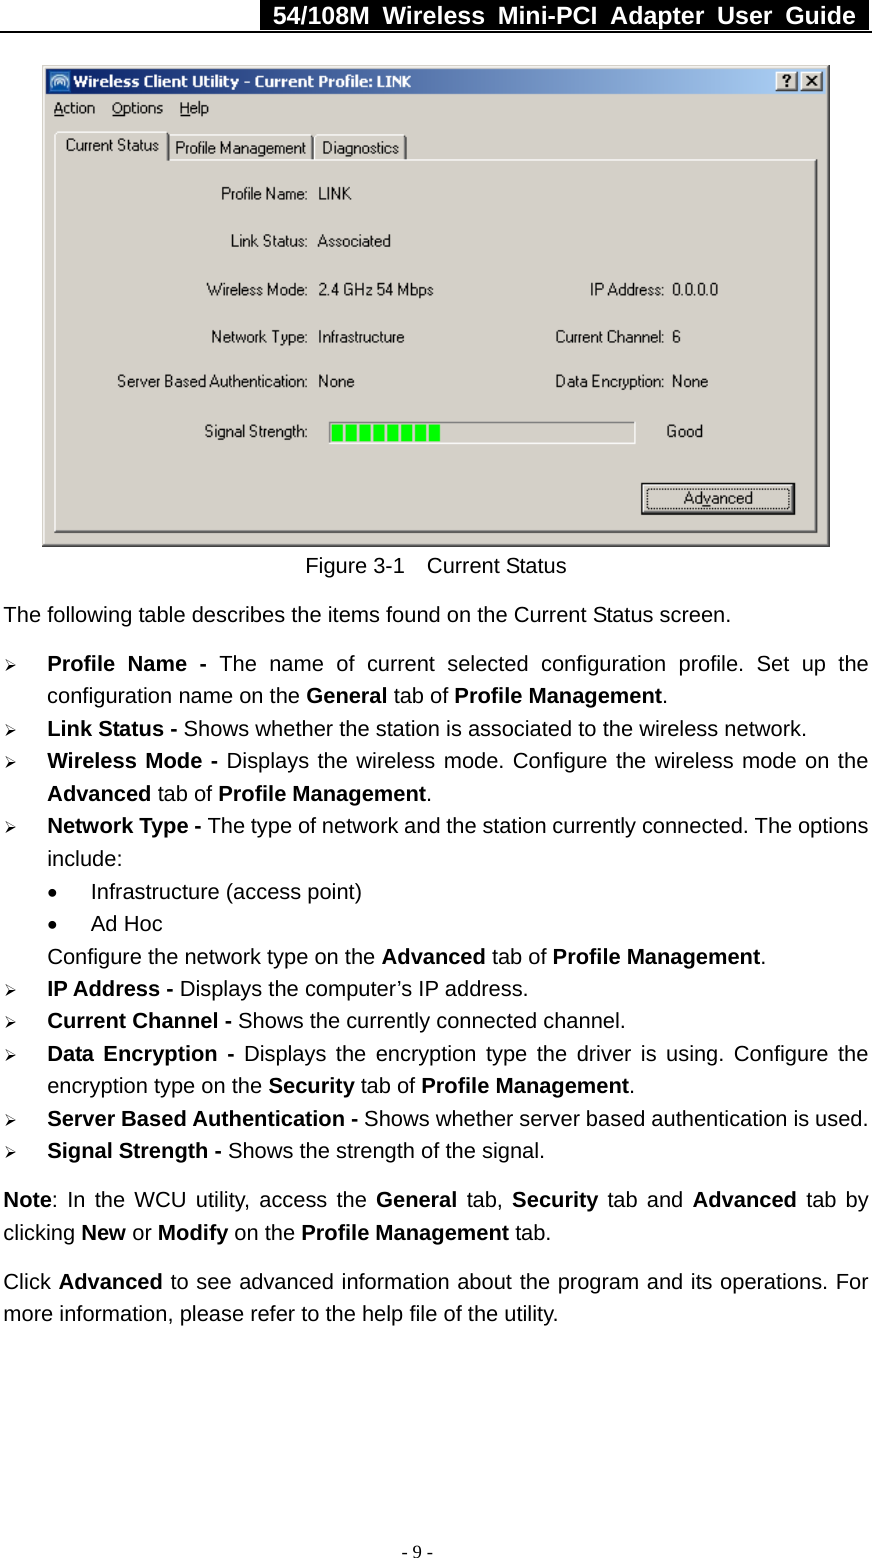   54/108M Wireless Mini-PCI Adapter User Guide  - 9 -  Figure 3-1  Current Status The following table describes the items found on the Current Status screen. ¾ Profile Name - The name of current selected configuration profile. Set up the configuration name on the General tab of Profile Management.  ¾ Link Status - Shows whether the station is associated to the wireless network. ¾ Wireless Mode - Displays the wireless mode. Configure the wireless mode on the Advanced tab of Profile Management. ¾ Network Type - The type of network and the station currently connected. The options include: •  Infrastructure (access point) • Ad Hoc Configure the network type on the Advanced tab of Profile Management. ¾ IP Address - Displays the computer’s IP address. ¾ Current Channel - Shows the currently connected channel. ¾ Data Encryption - Displays the encryption type the driver is using. Configure the encryption type on the Security tab of Profile Management. ¾ Server Based Authentication - Shows whether server based authentication is used. ¾ Signal Strength - Shows the strength of the signal. Note: In the WCU utility, access the General tab, Security tab and Advanced tab by clicking New or Modify on the Profile Management tab. Click Advanced to see advanced information about the program and its operations. For more information, please refer to the help file of the utility. 